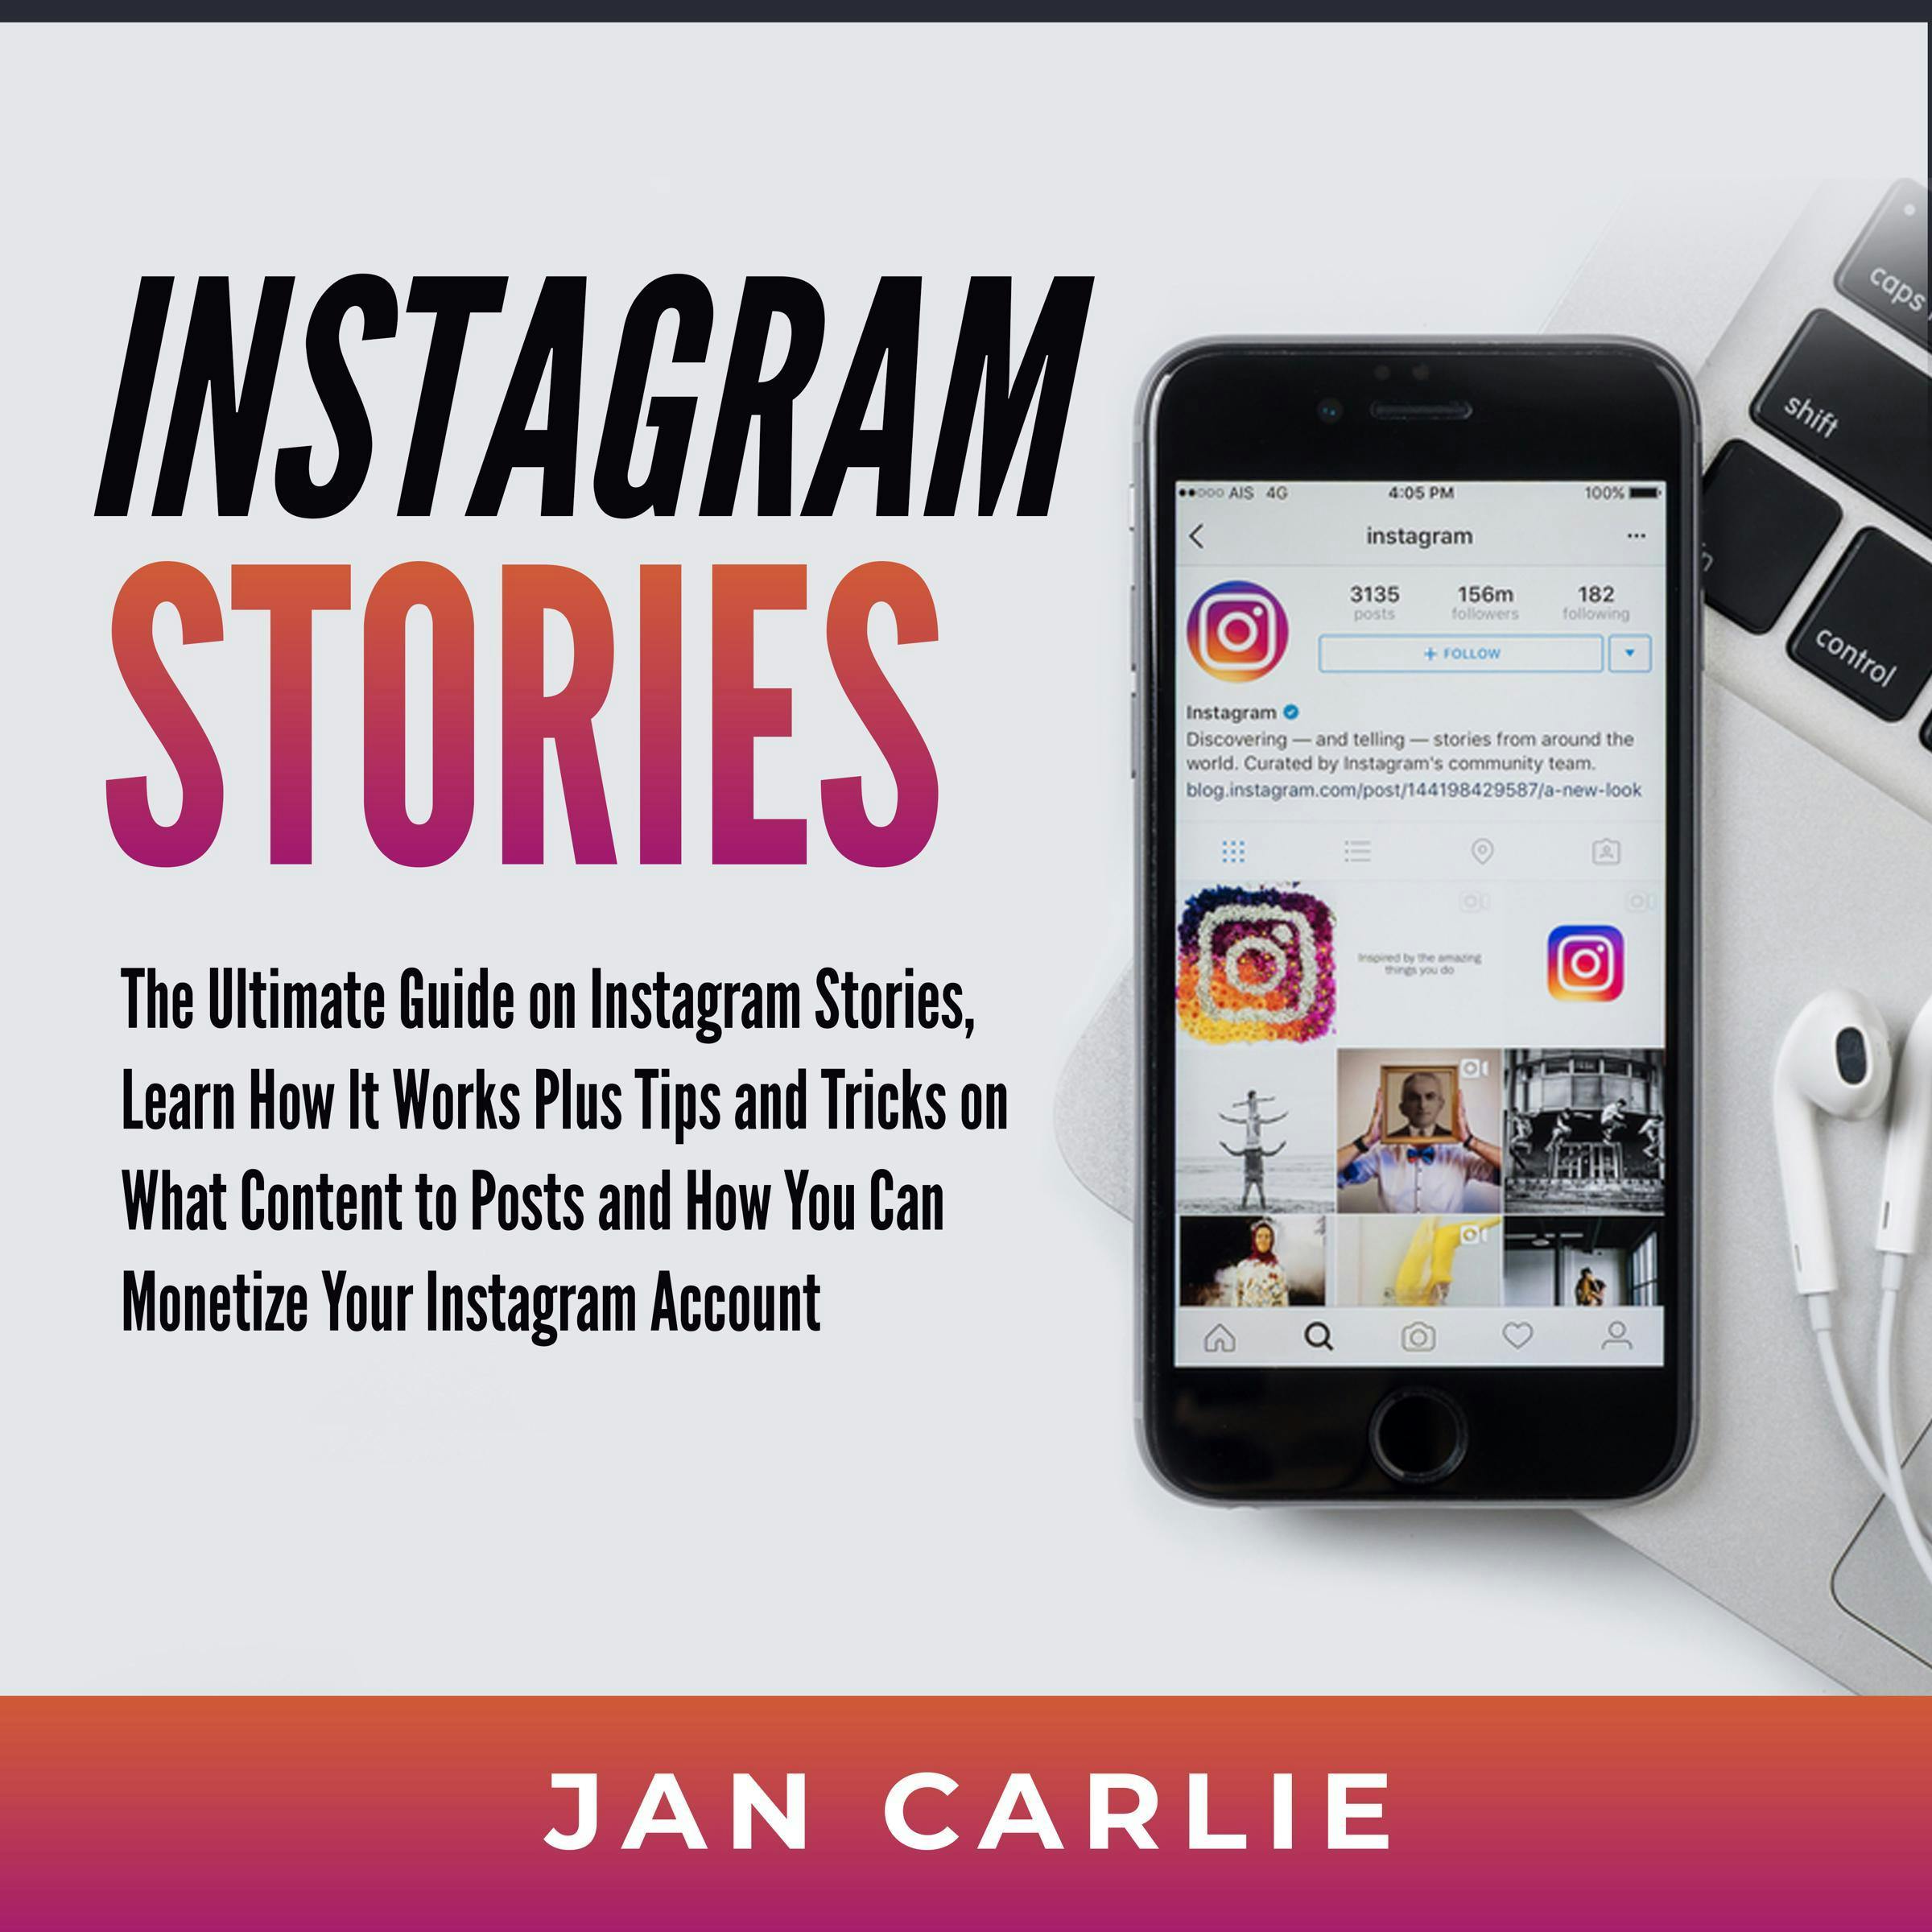 Instagram Stories: The Ultimate Guide on Instagram Stories, Learn How It Works Plus Tips and Tricks on What Content to Posts and How You Can Monetize Your Instagram Account - Jan Carlie